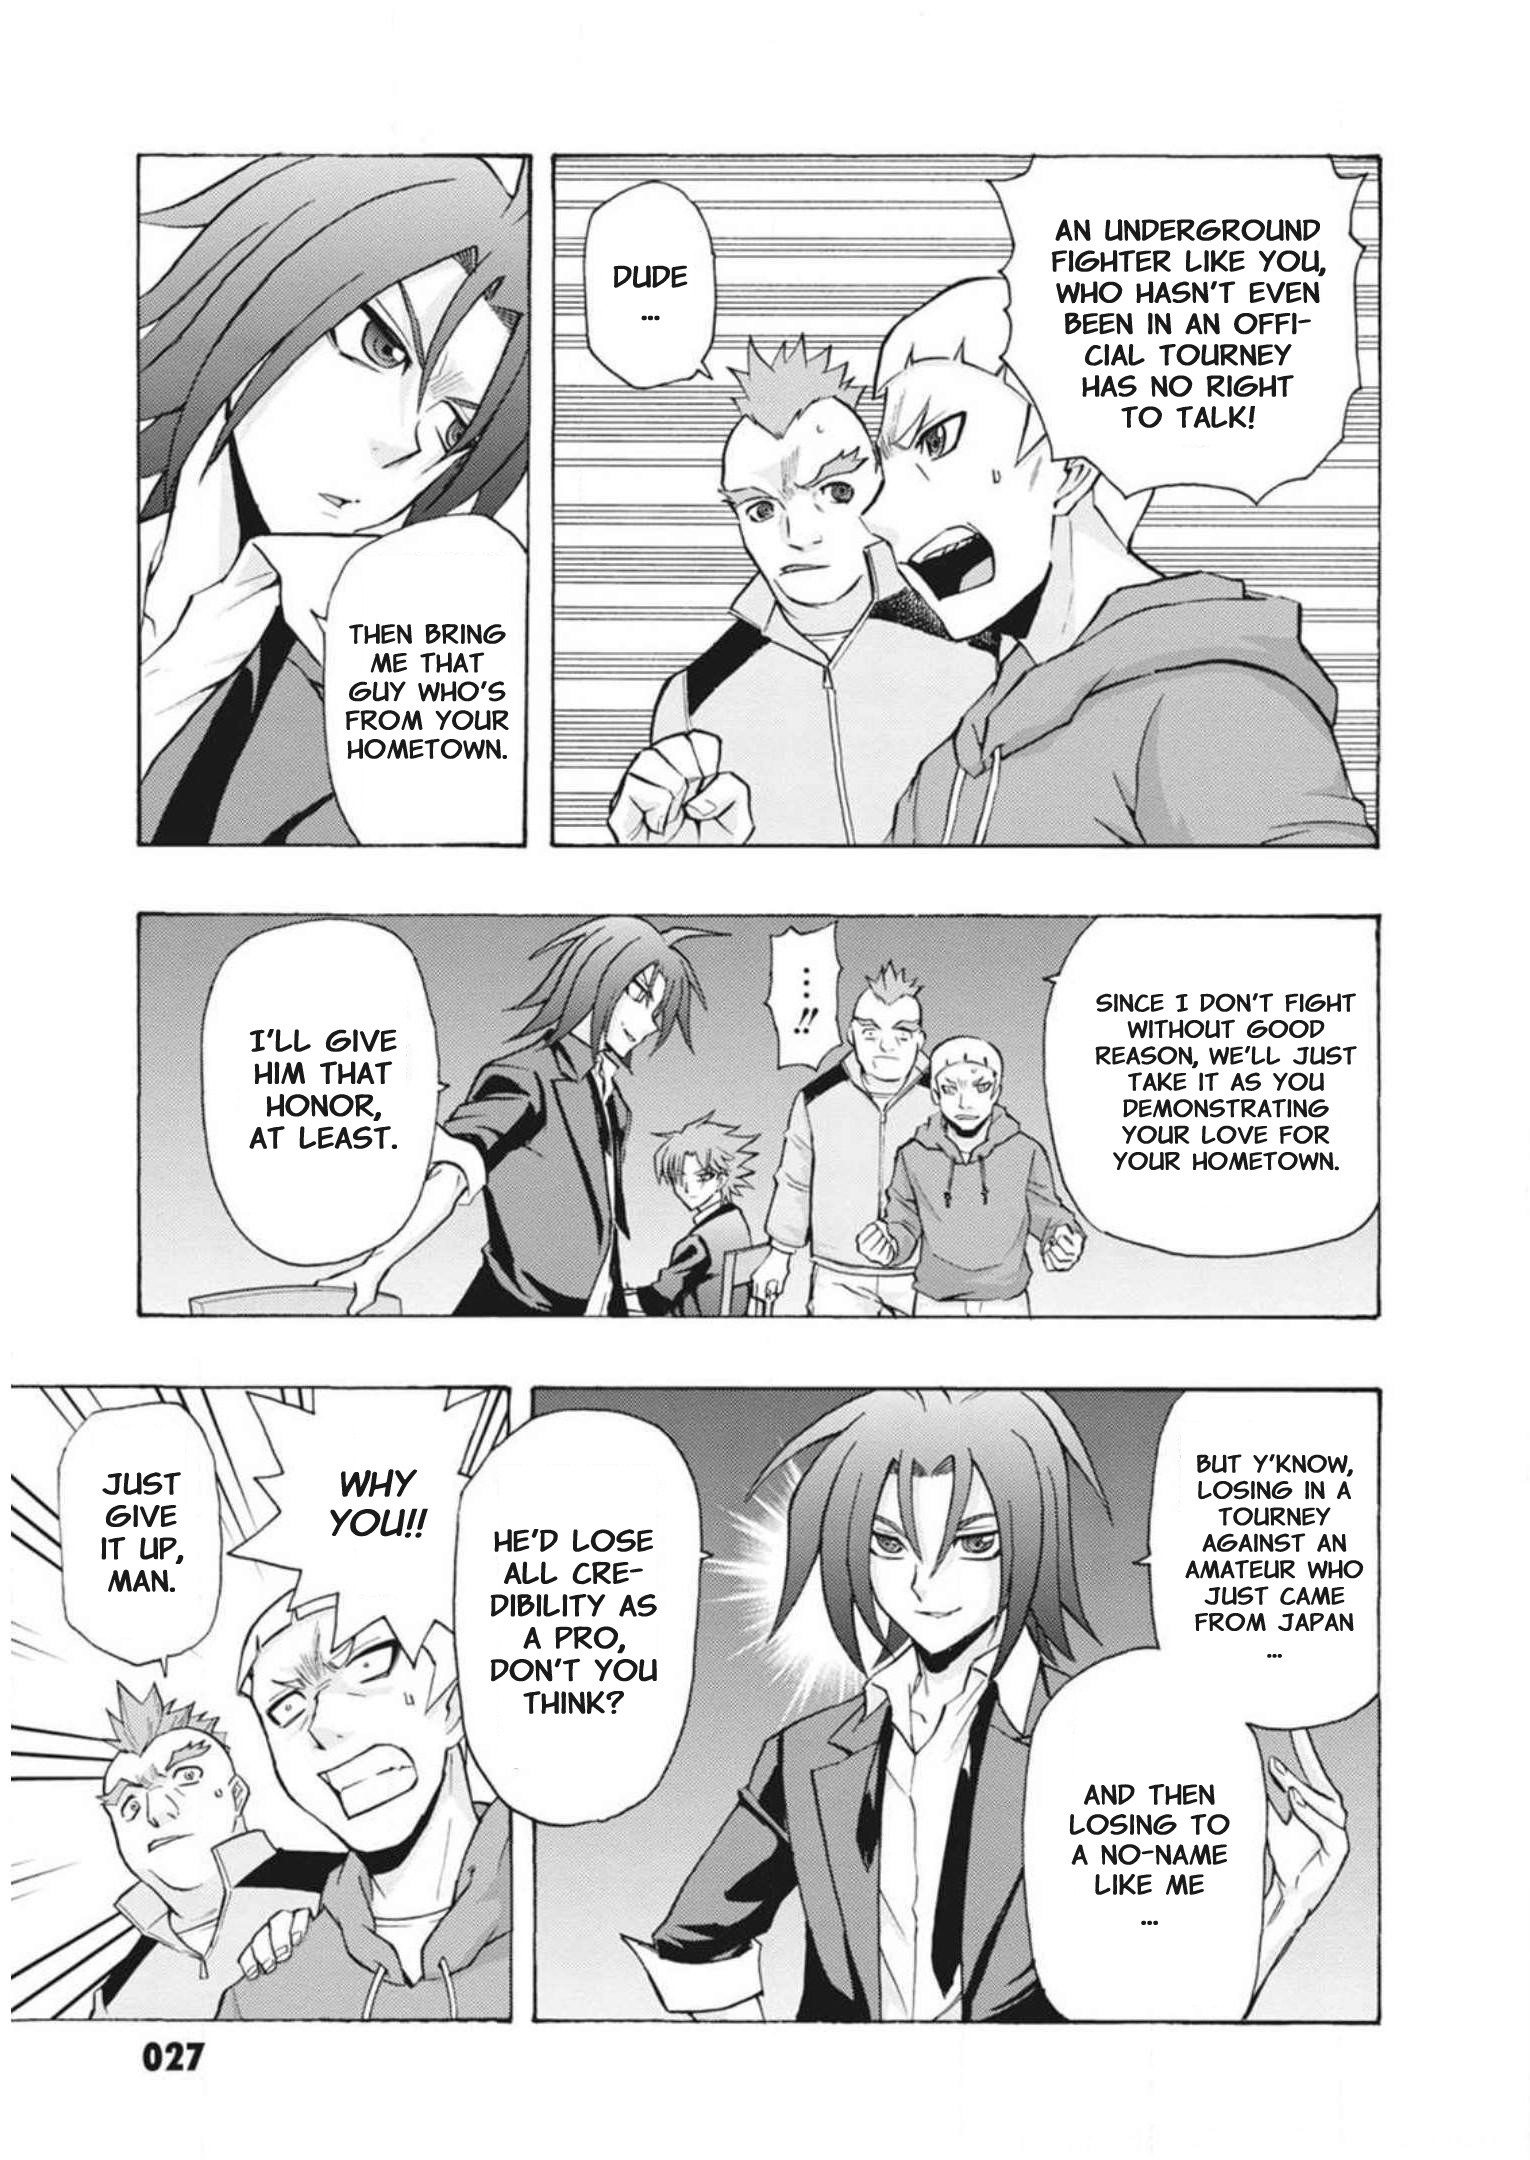 Cardfight!! Vanguard: Turnabout Vol.1 Chapter 2: A Real Fight - Picture 3